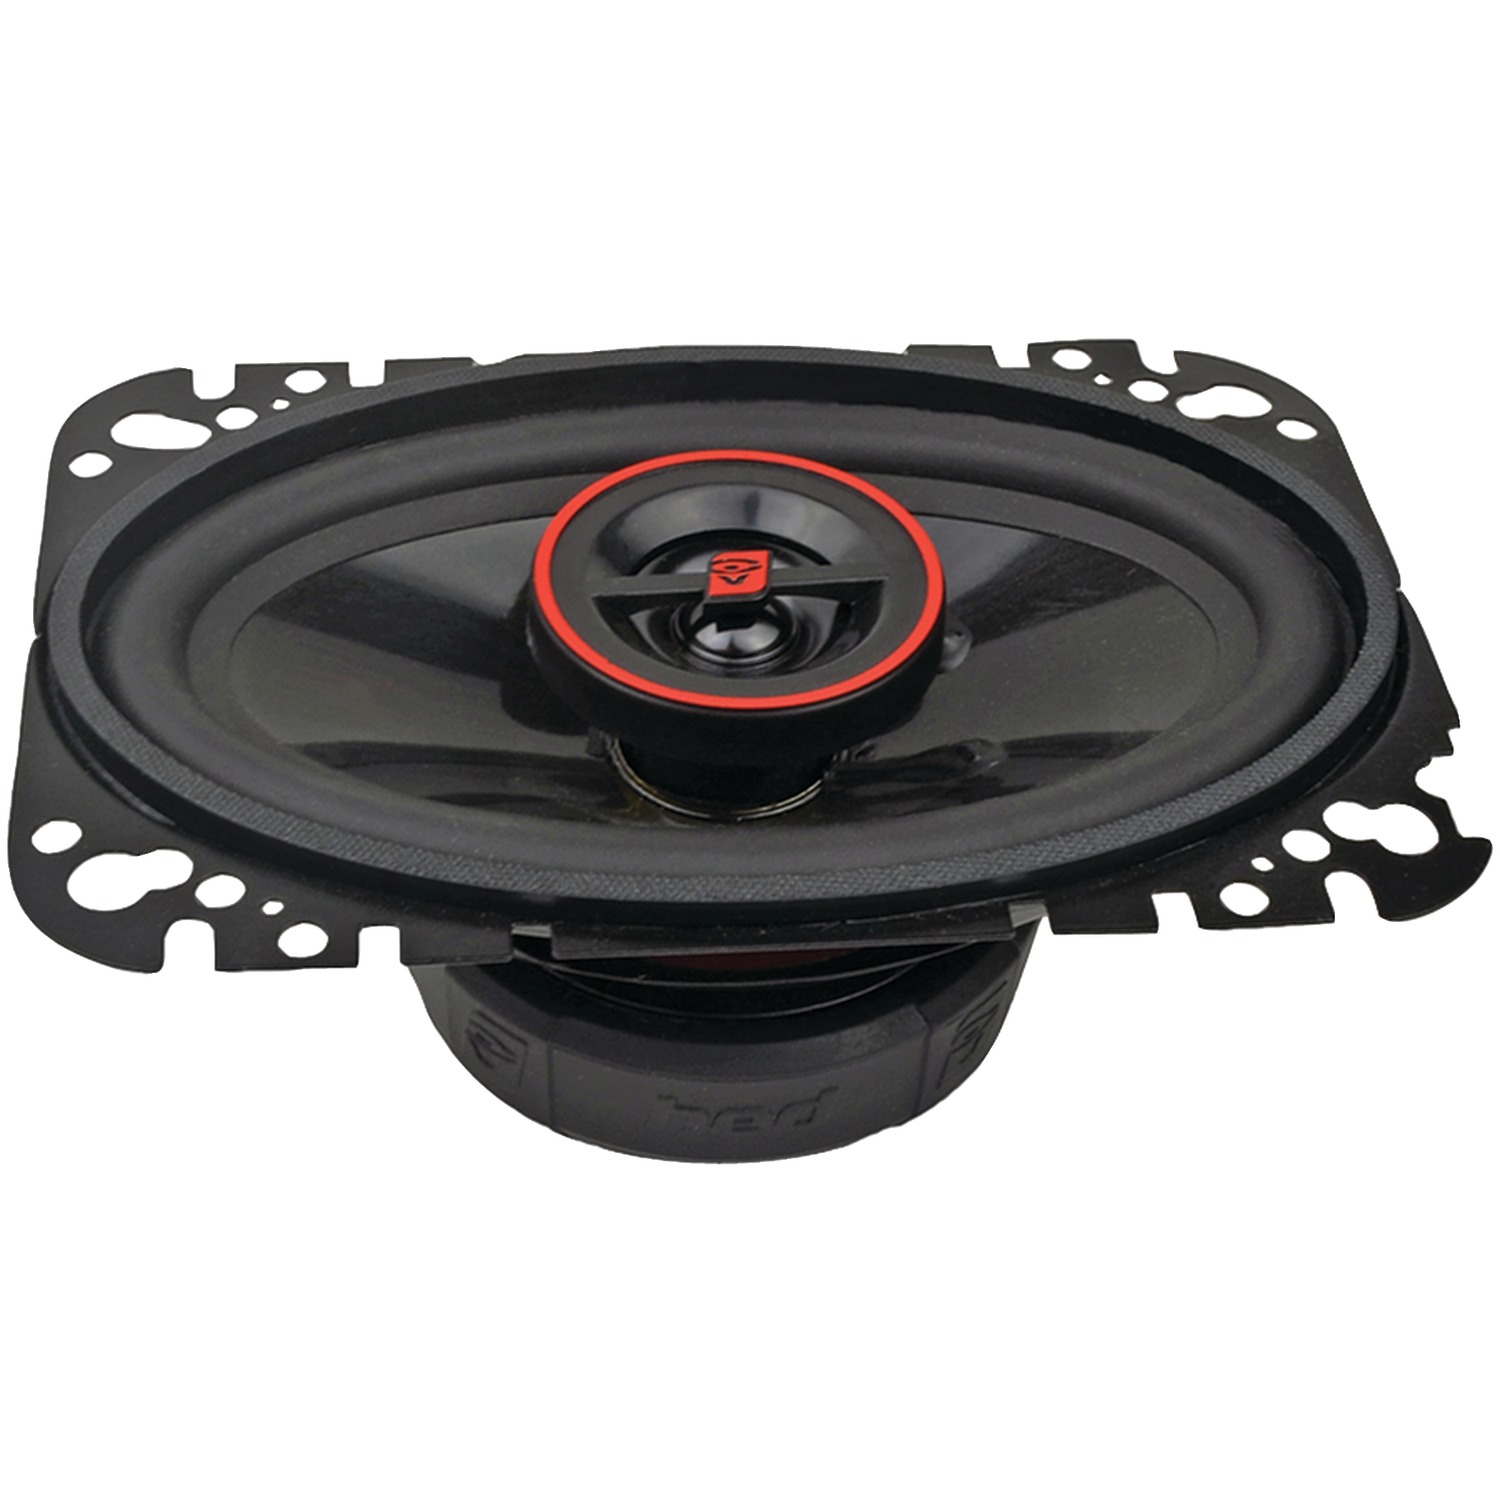 Cerwin-Vega Mobile HED® Series 2-Way Coaxial Speakers (4" x 6", 275 Watts max) - image 3 of 3